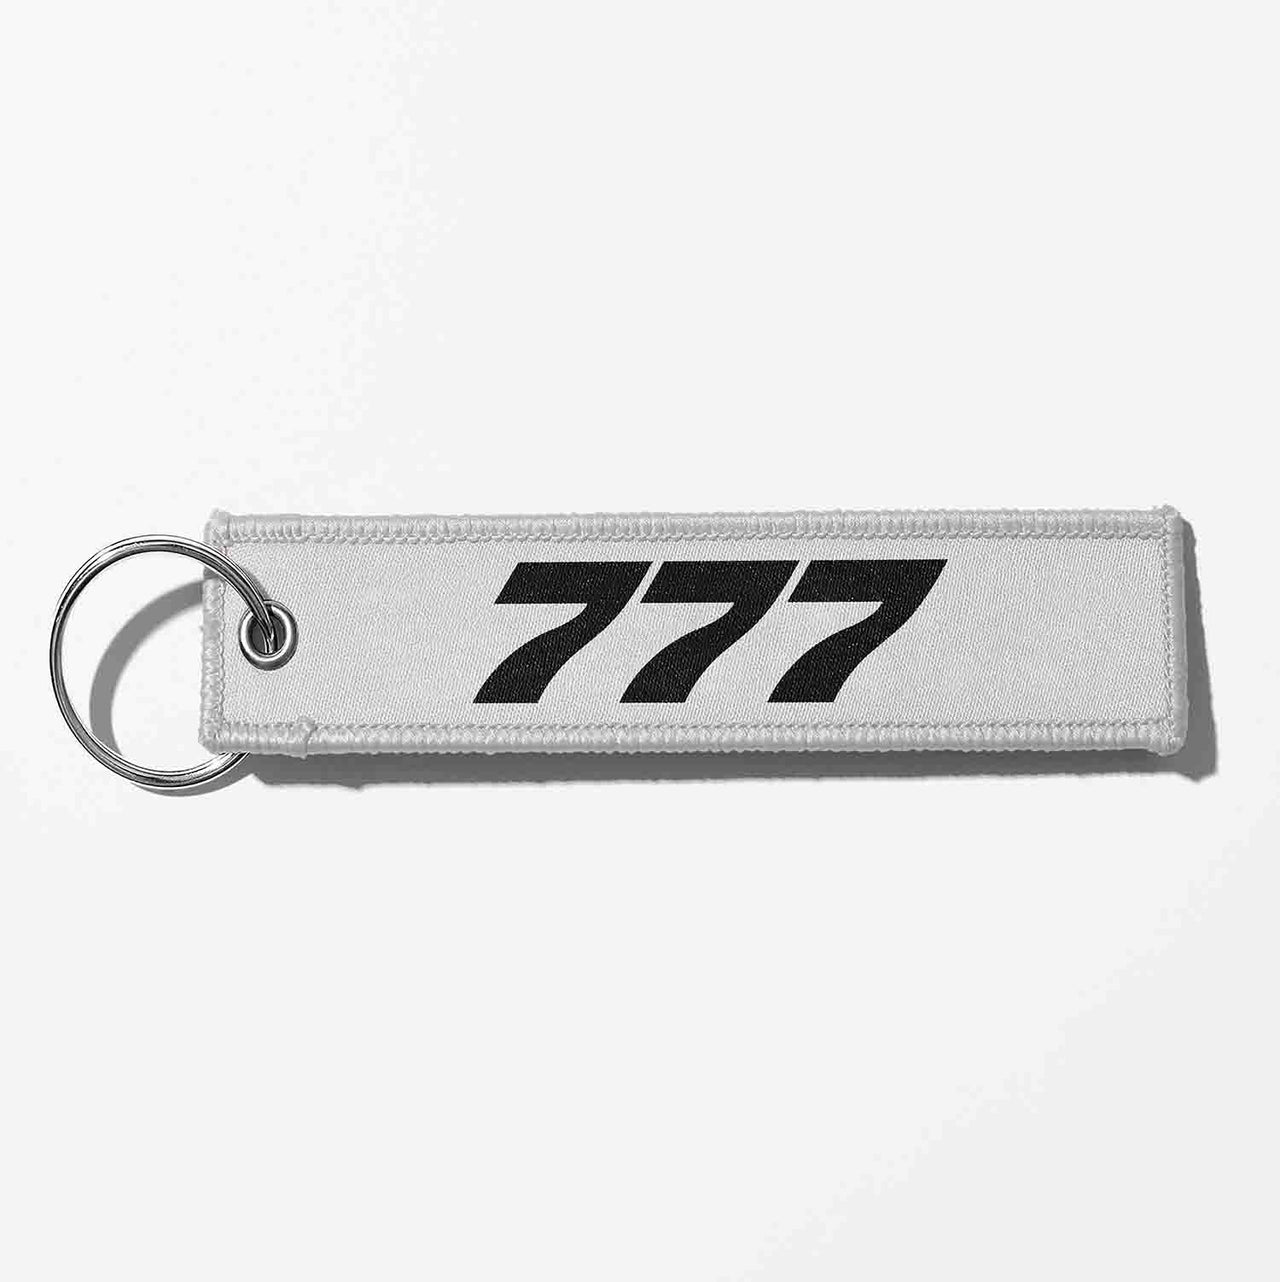 Boeing 777 Flat Text Designed Key Chains